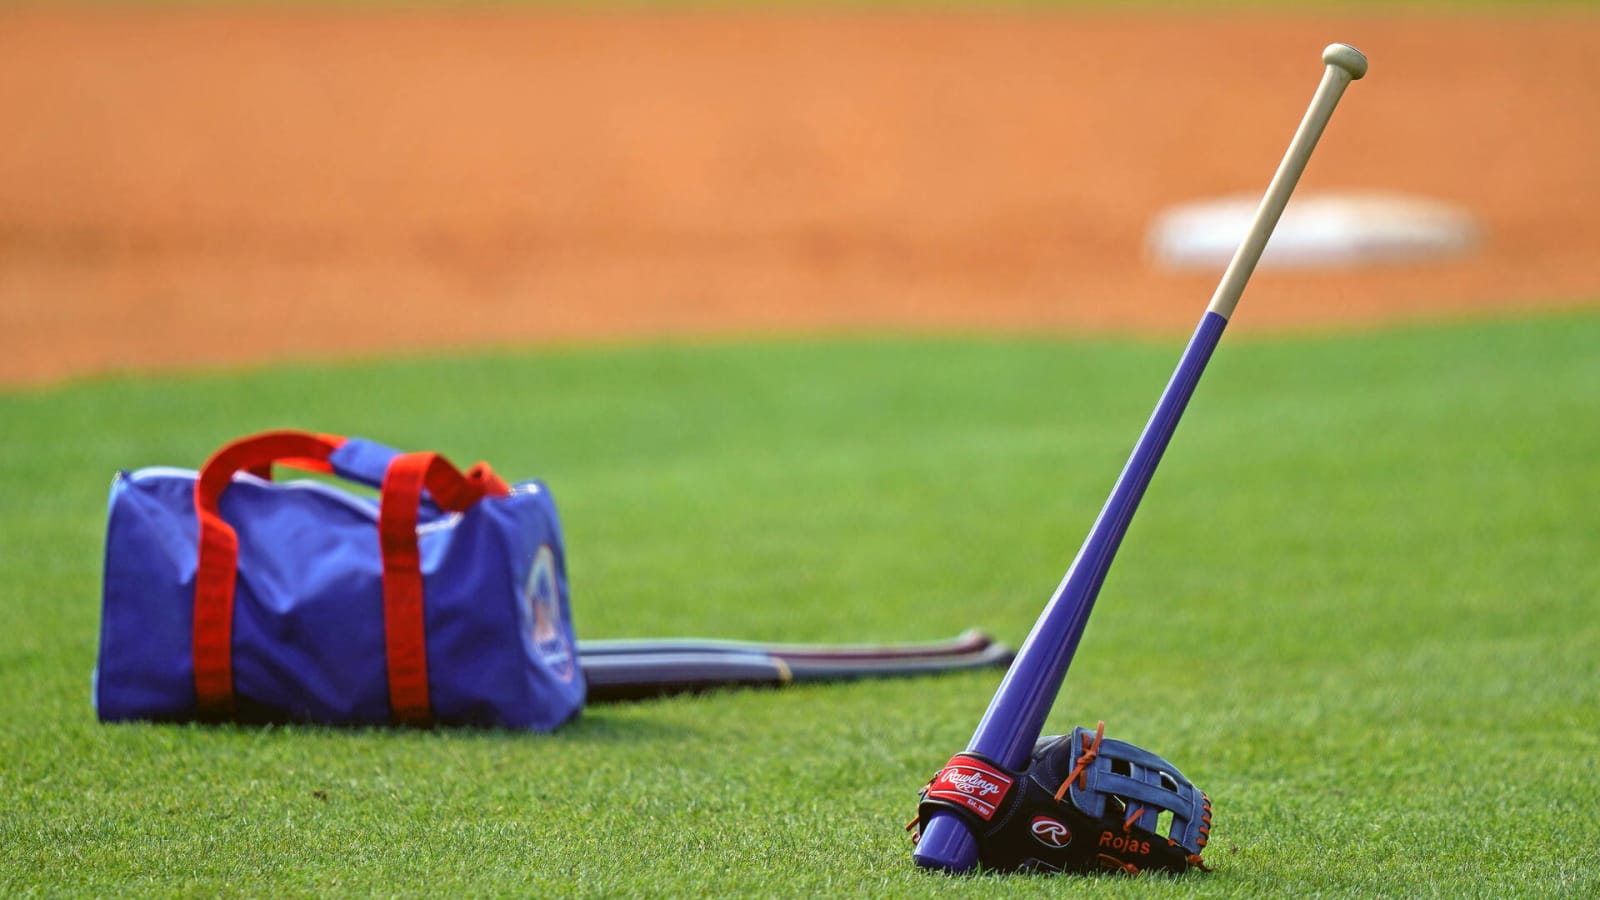 MLBPA: 'Nothing requires' MLB to delay spring training